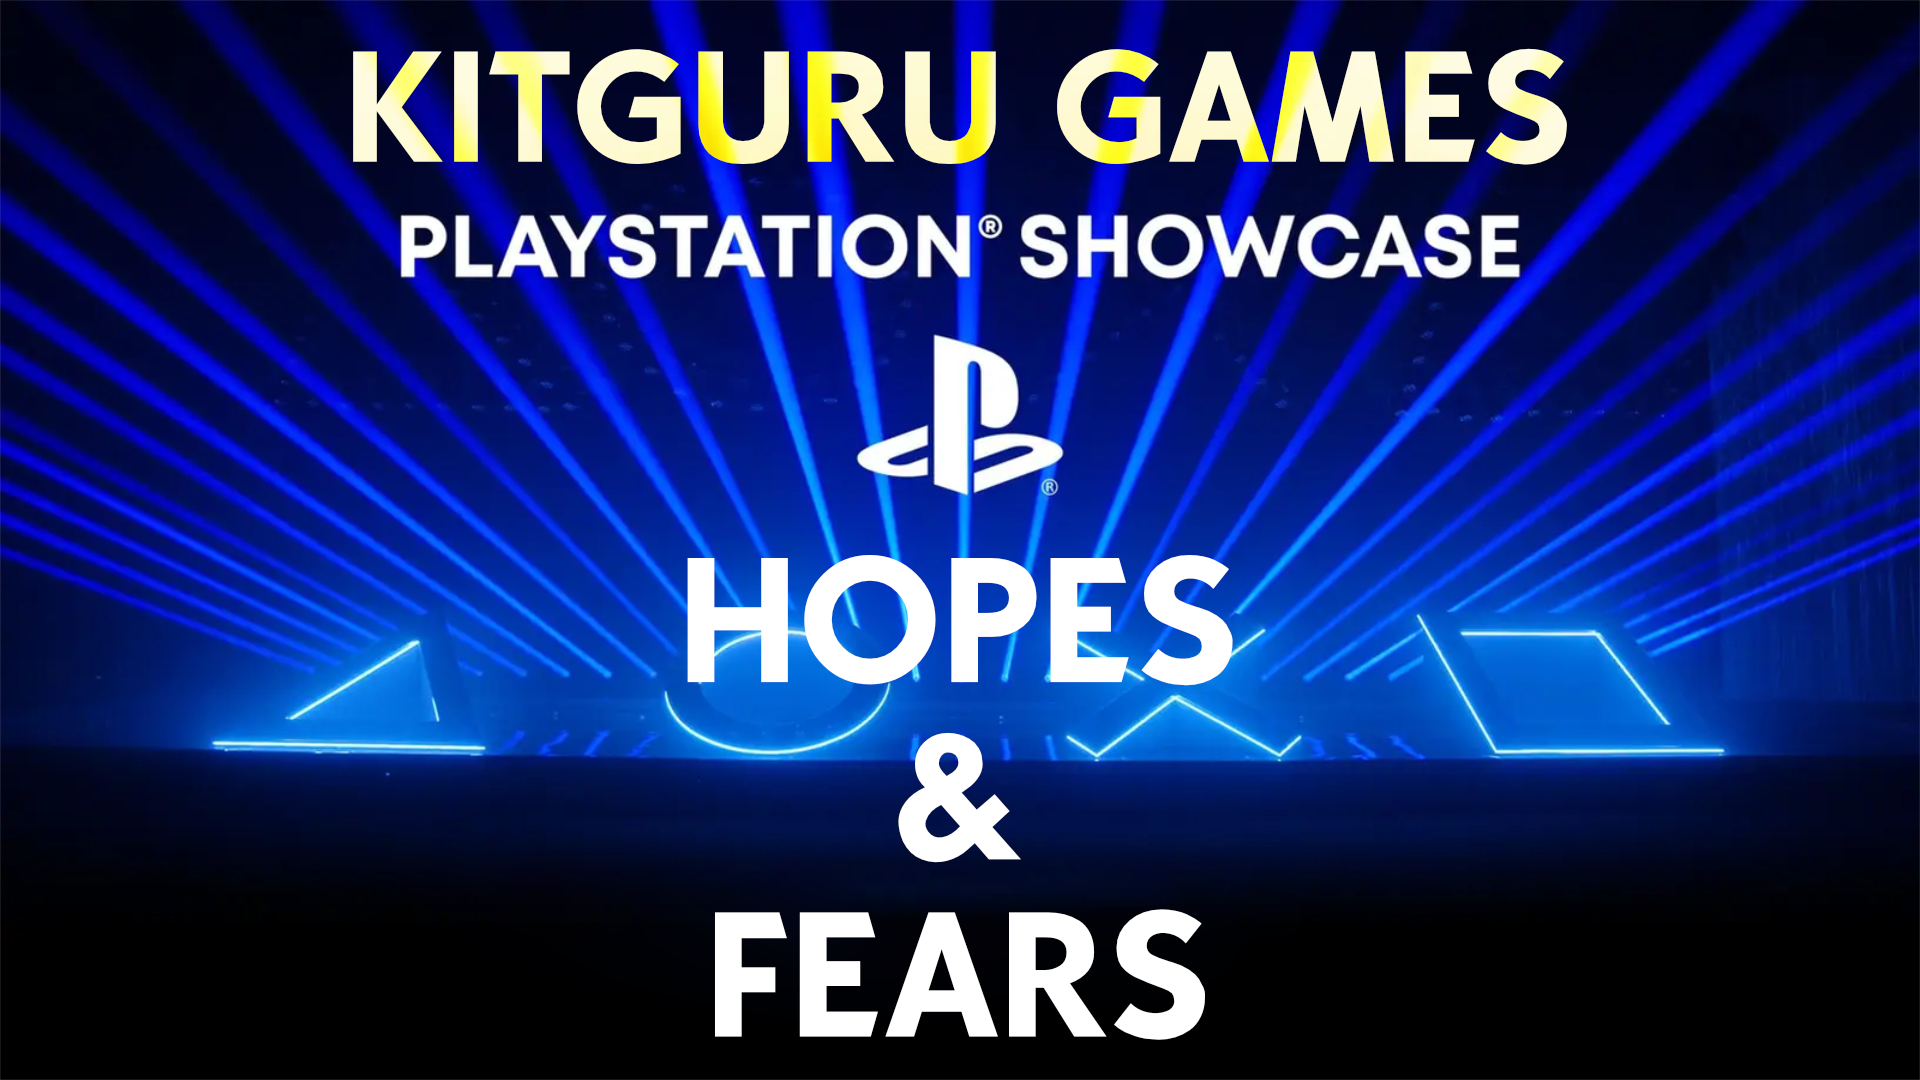 Almost every PS5 game at the PlayStation Showcase 2021 was a